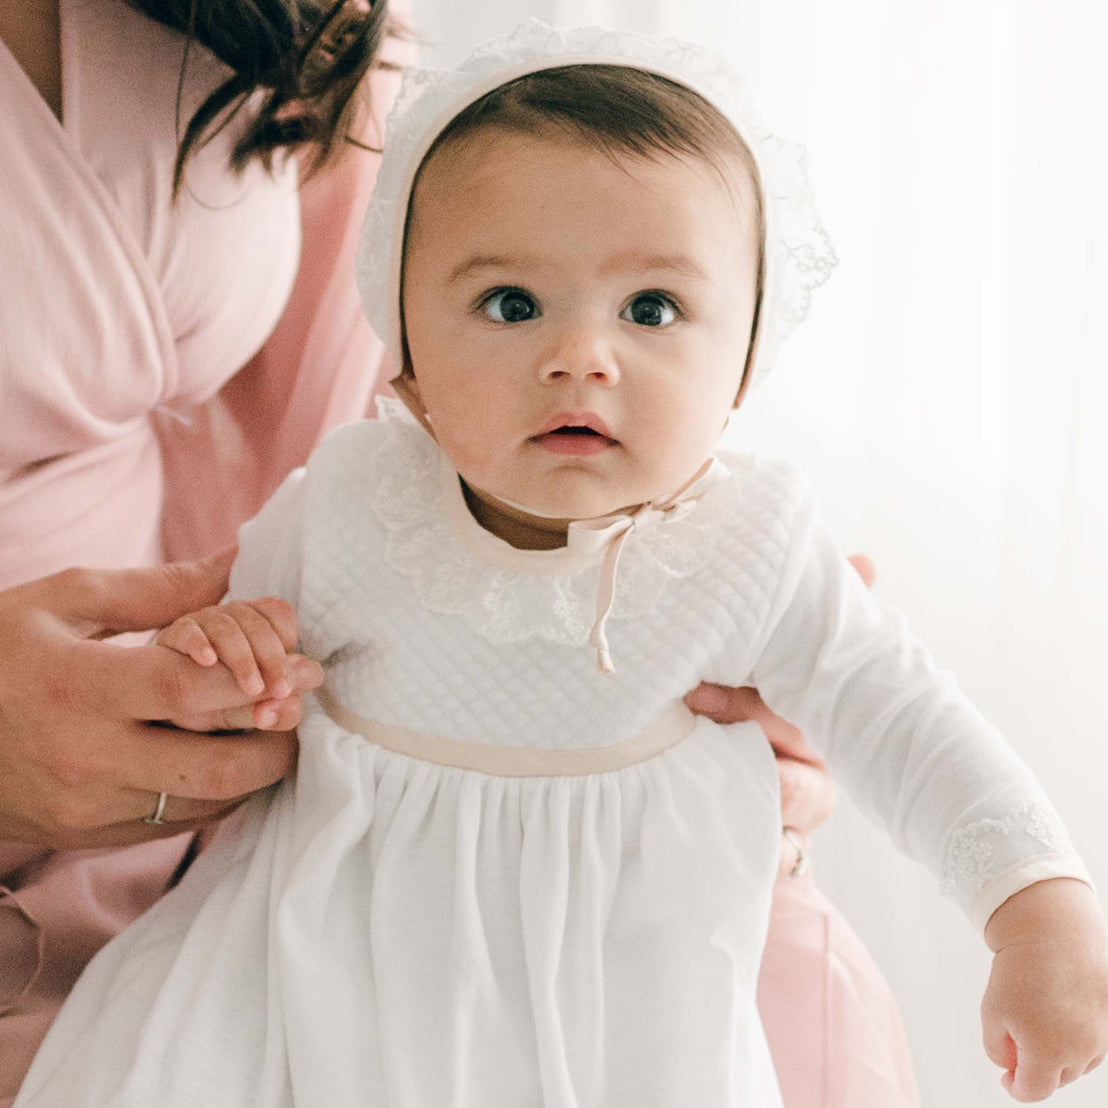 Close up photo of a newborn baby girl wearing the Tessa Quilt Newborn Gown accompanied by her mother. The newborn gown is made with soft pima cotton in white and features a plush white quilt bodice with an ivory Venice lace accent along the neck and cuffs.